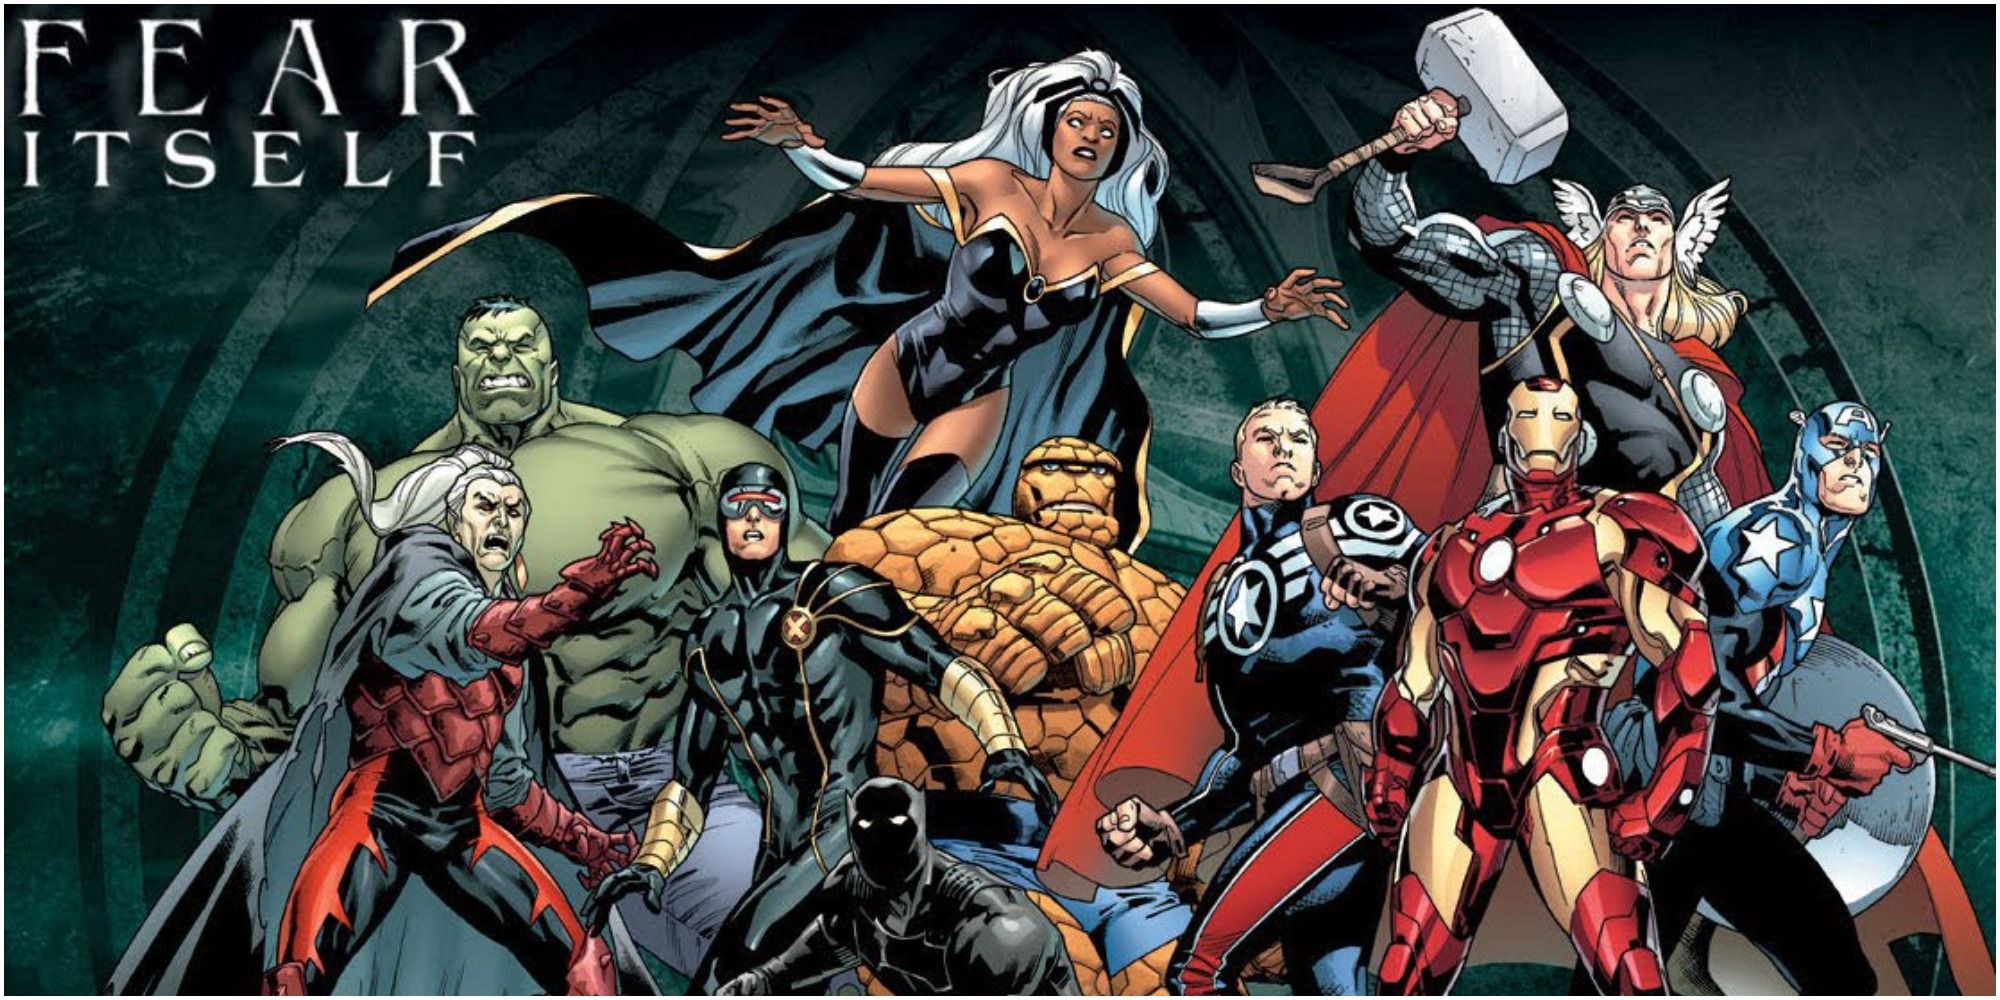 Marvel cover of the Fear Nothing with all the Avengers standing together